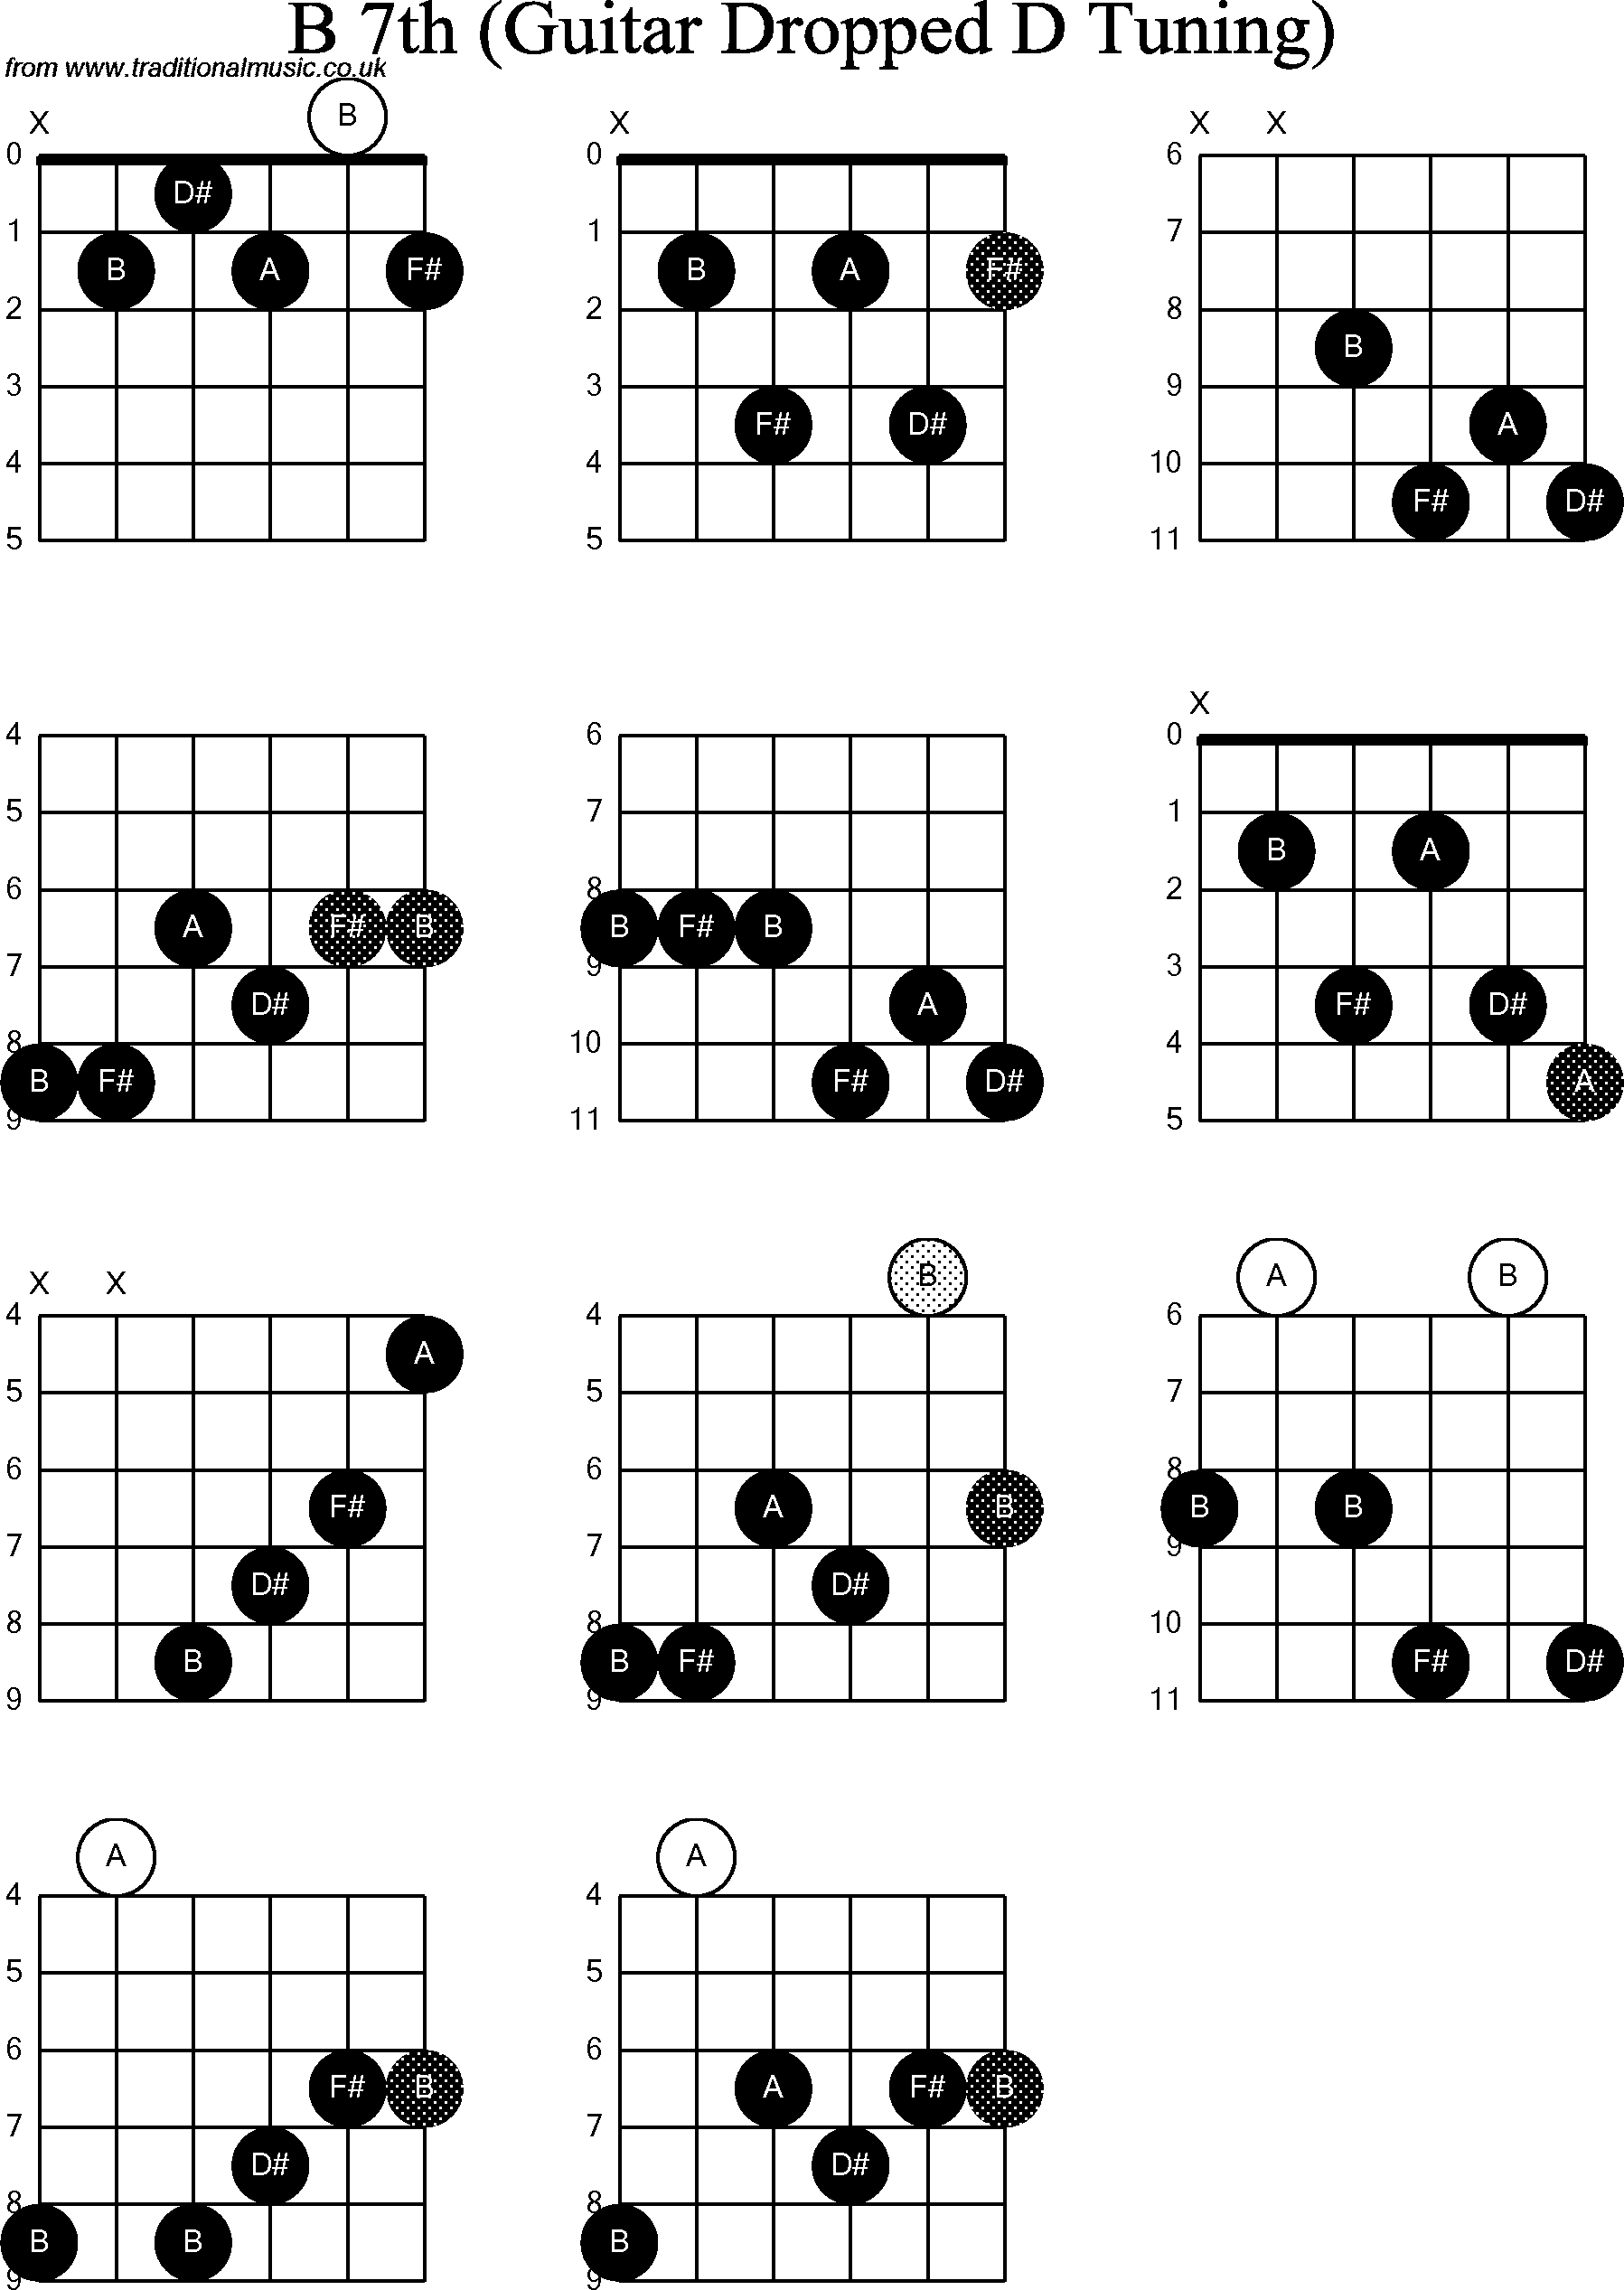 Chord diagrams for dropped D Guitar(DADGBE), B7th